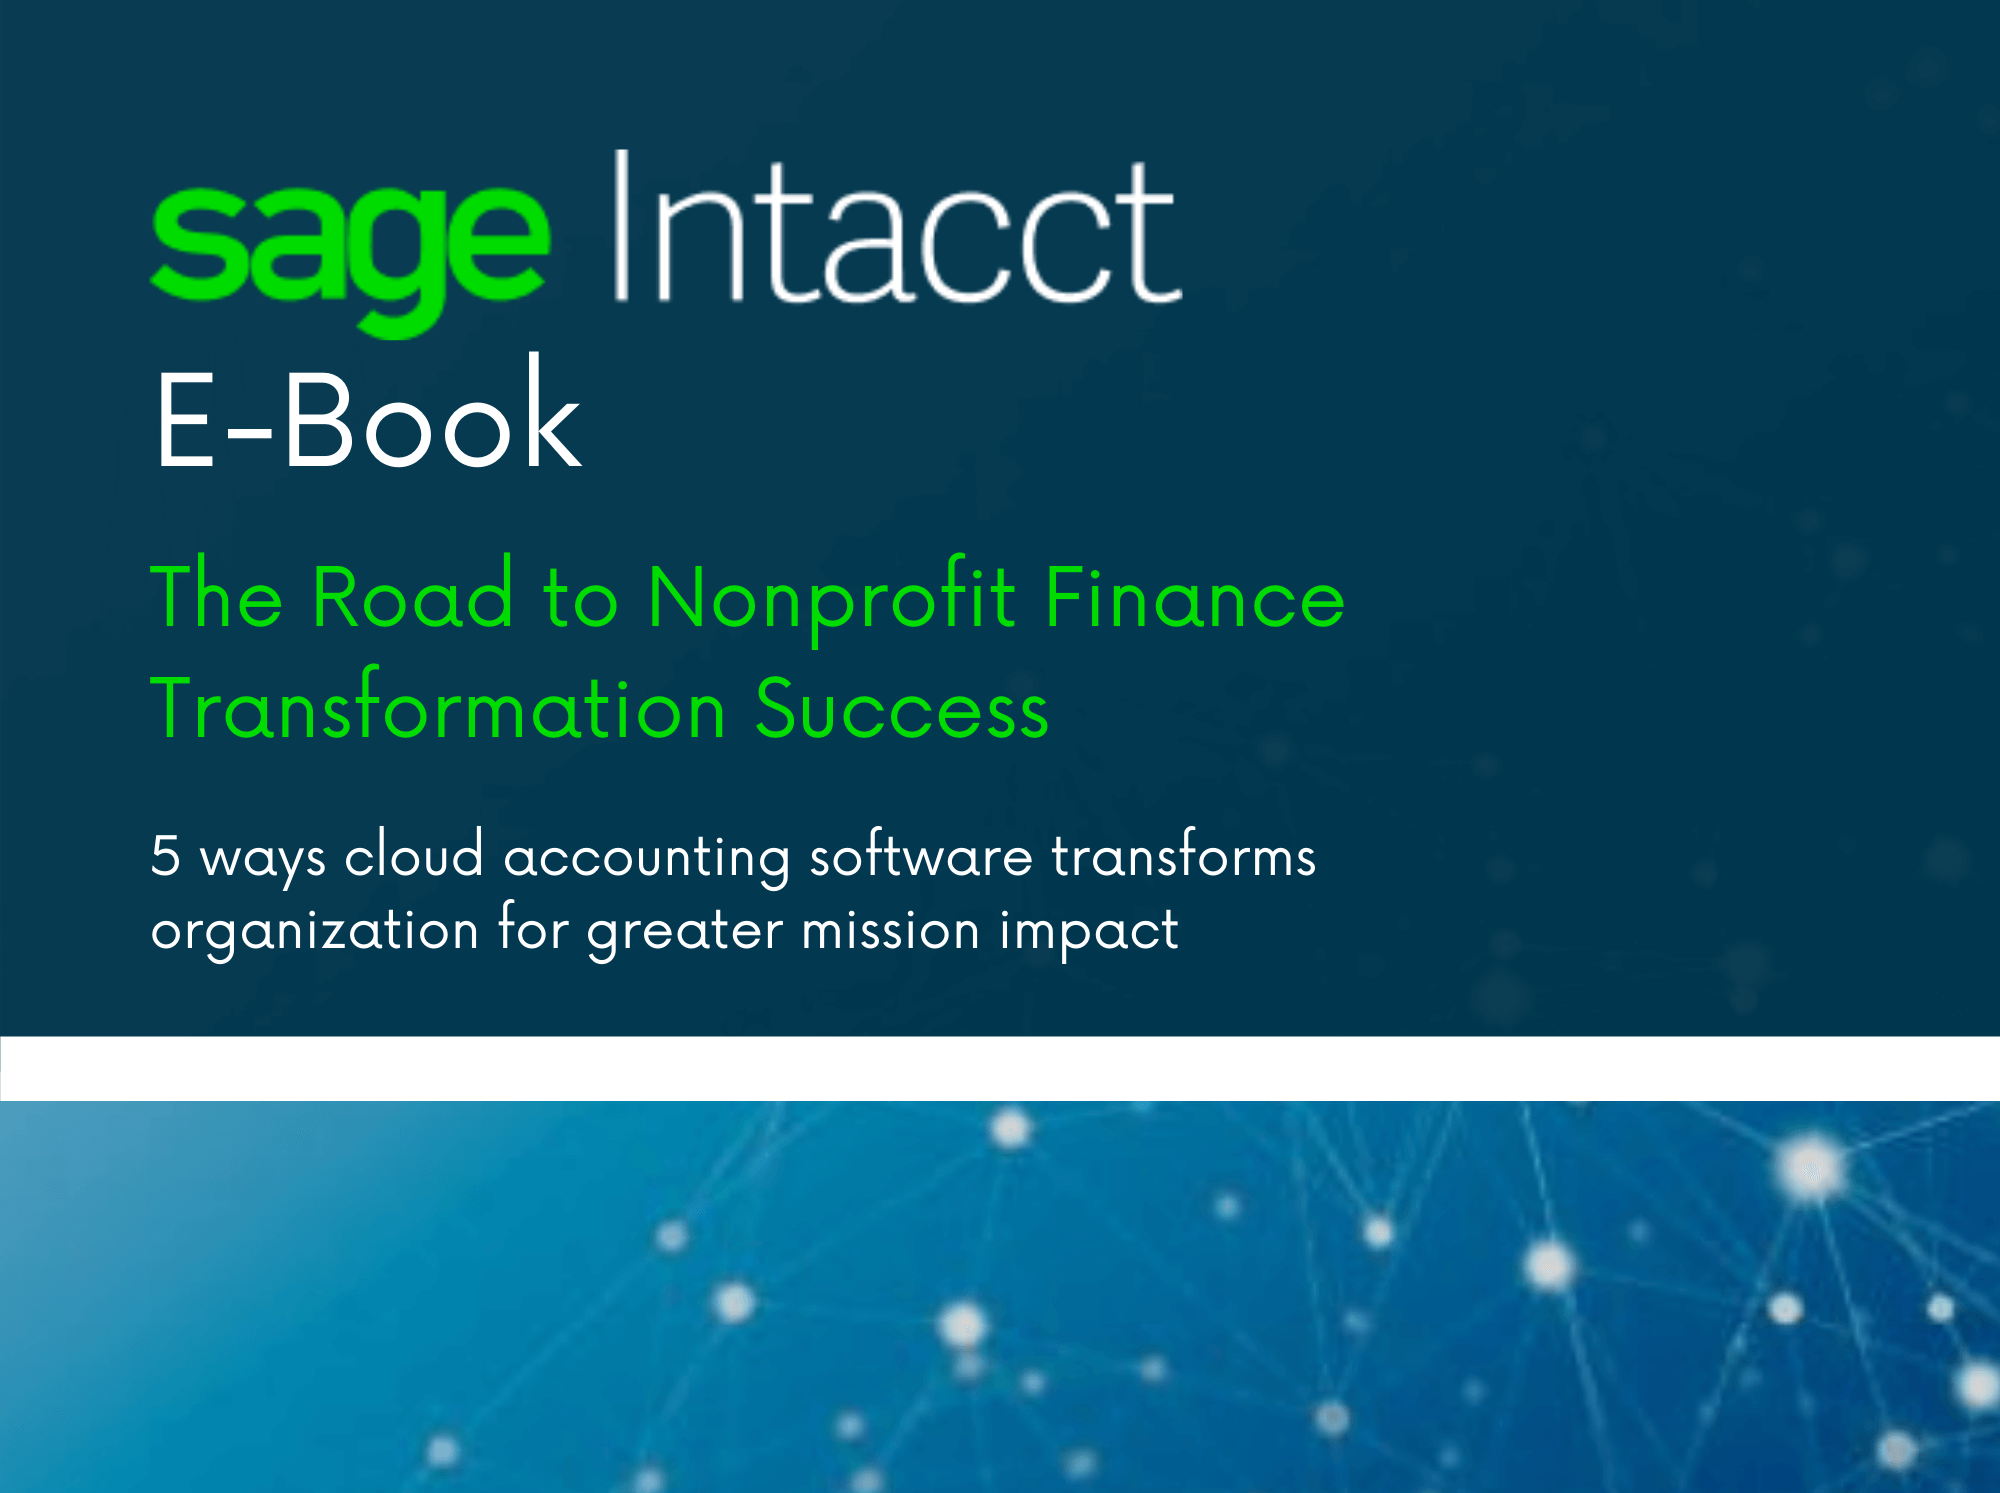 Sage Intacct Ebook - The Road to Nonprofit Finance Transformation Success